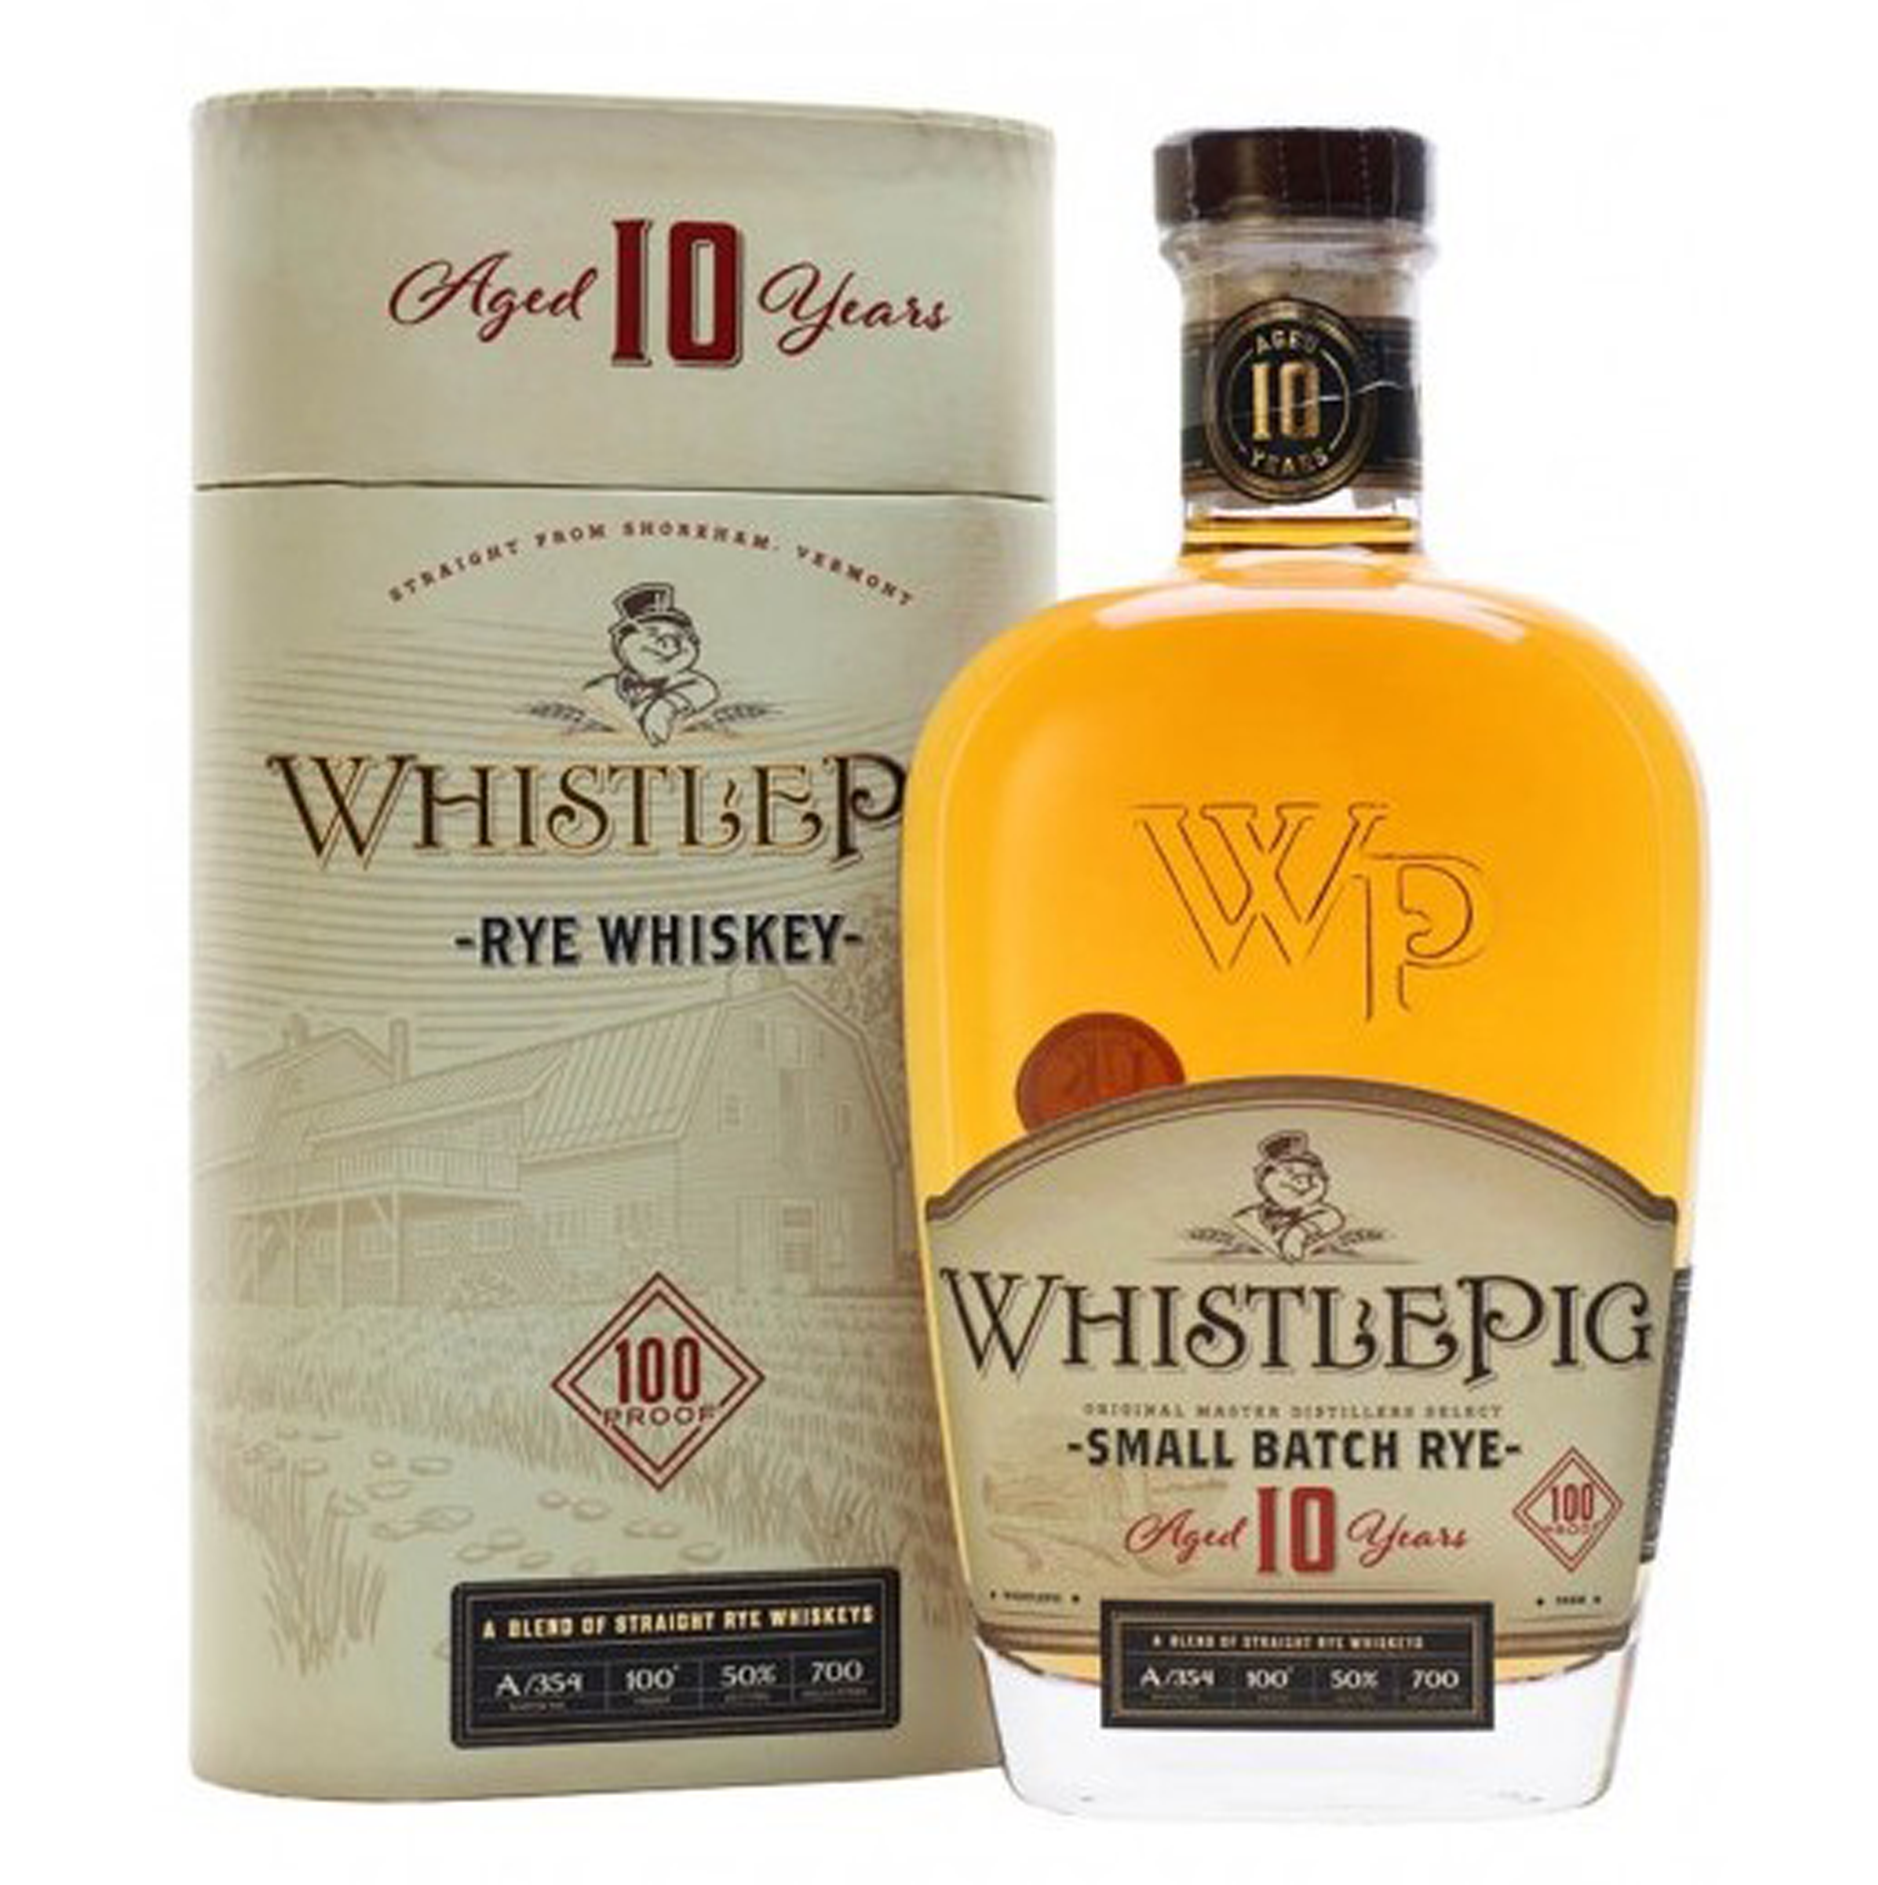 Laciviltadelbere American Whiskey Small Batch Rye 10 Y.O. Whistlepig